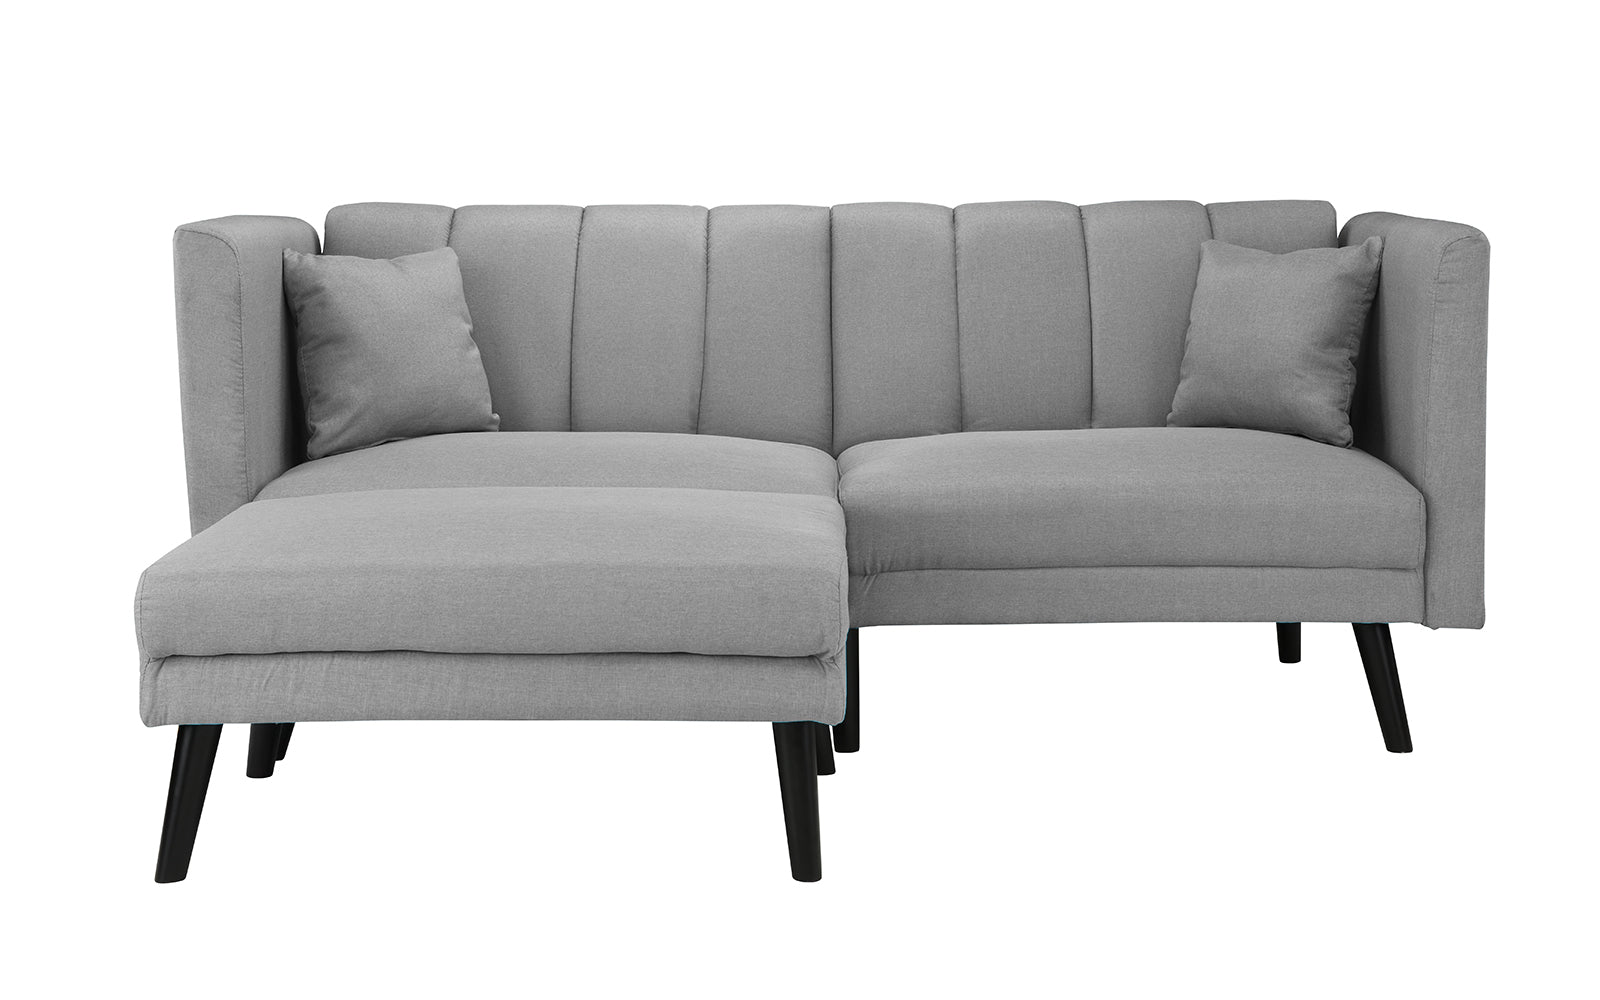 Esme Contemporary Loveseat Sleeper Futon with Chaise Lounge